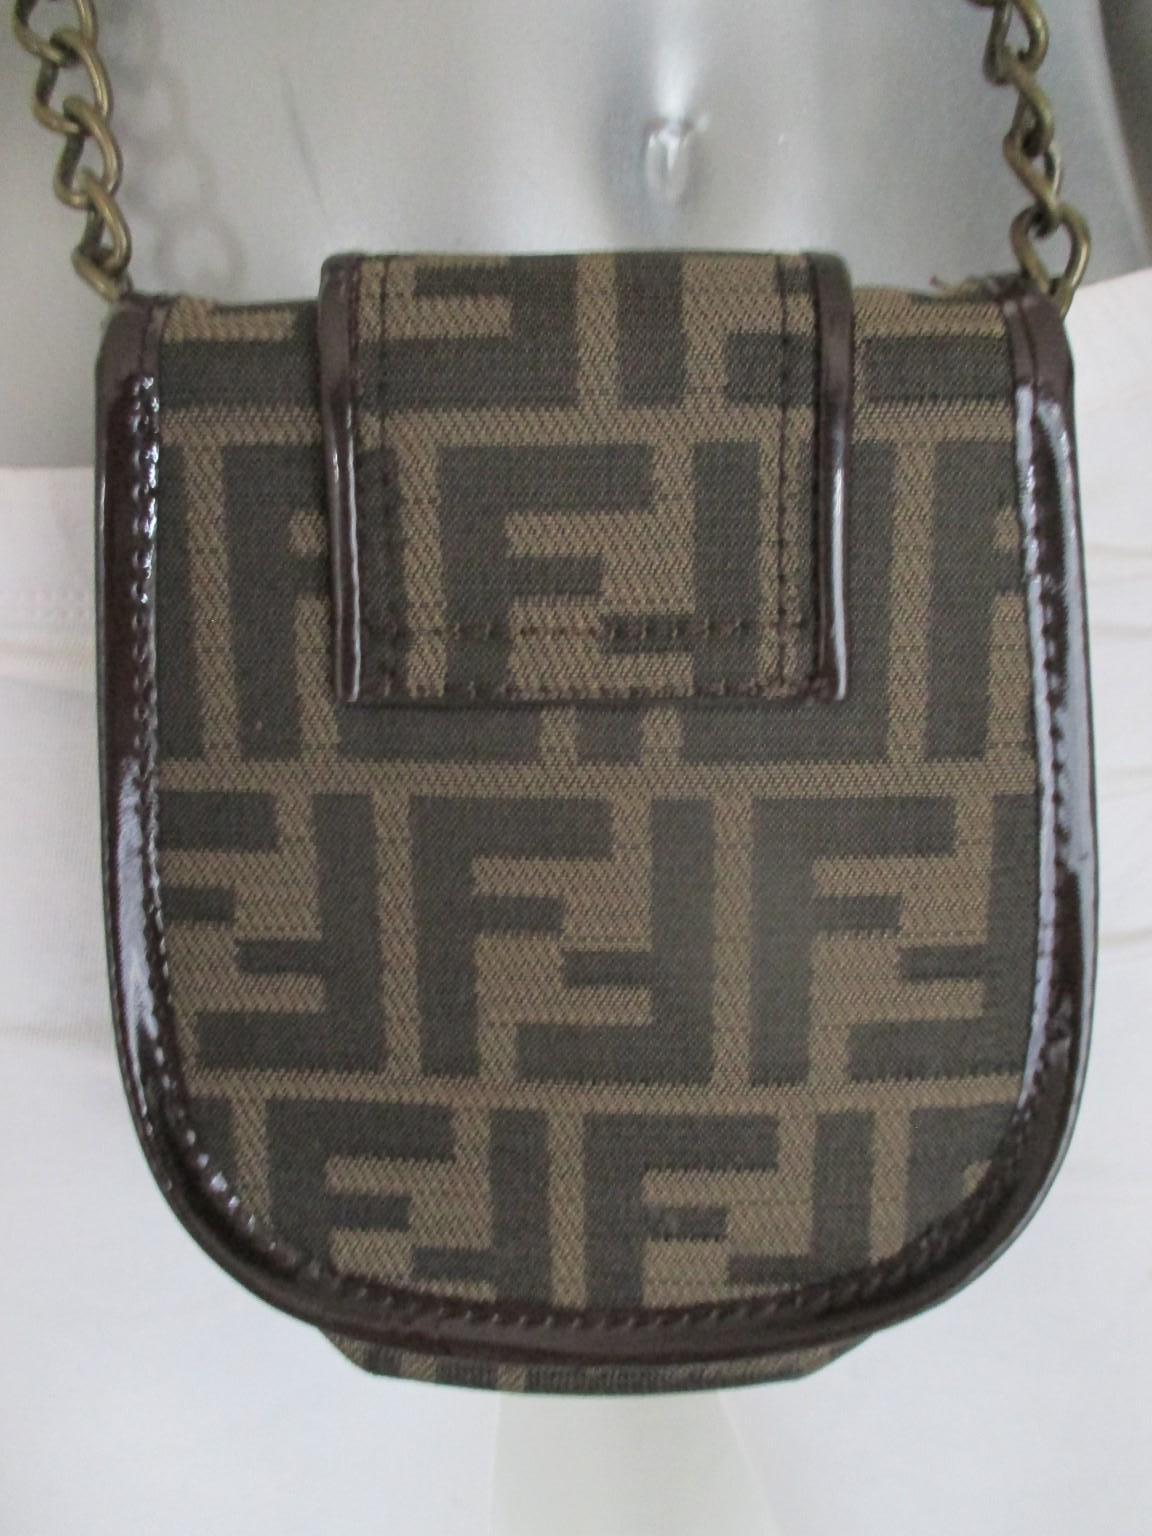 Vintage 1990 Fendi small cross body bag -collectors item- for your phone and/or lipstick
Color and material: brown patent leather with fendi logo fabric
Gold tone hardware logo
Condition is fair with minor wear at the patent leather